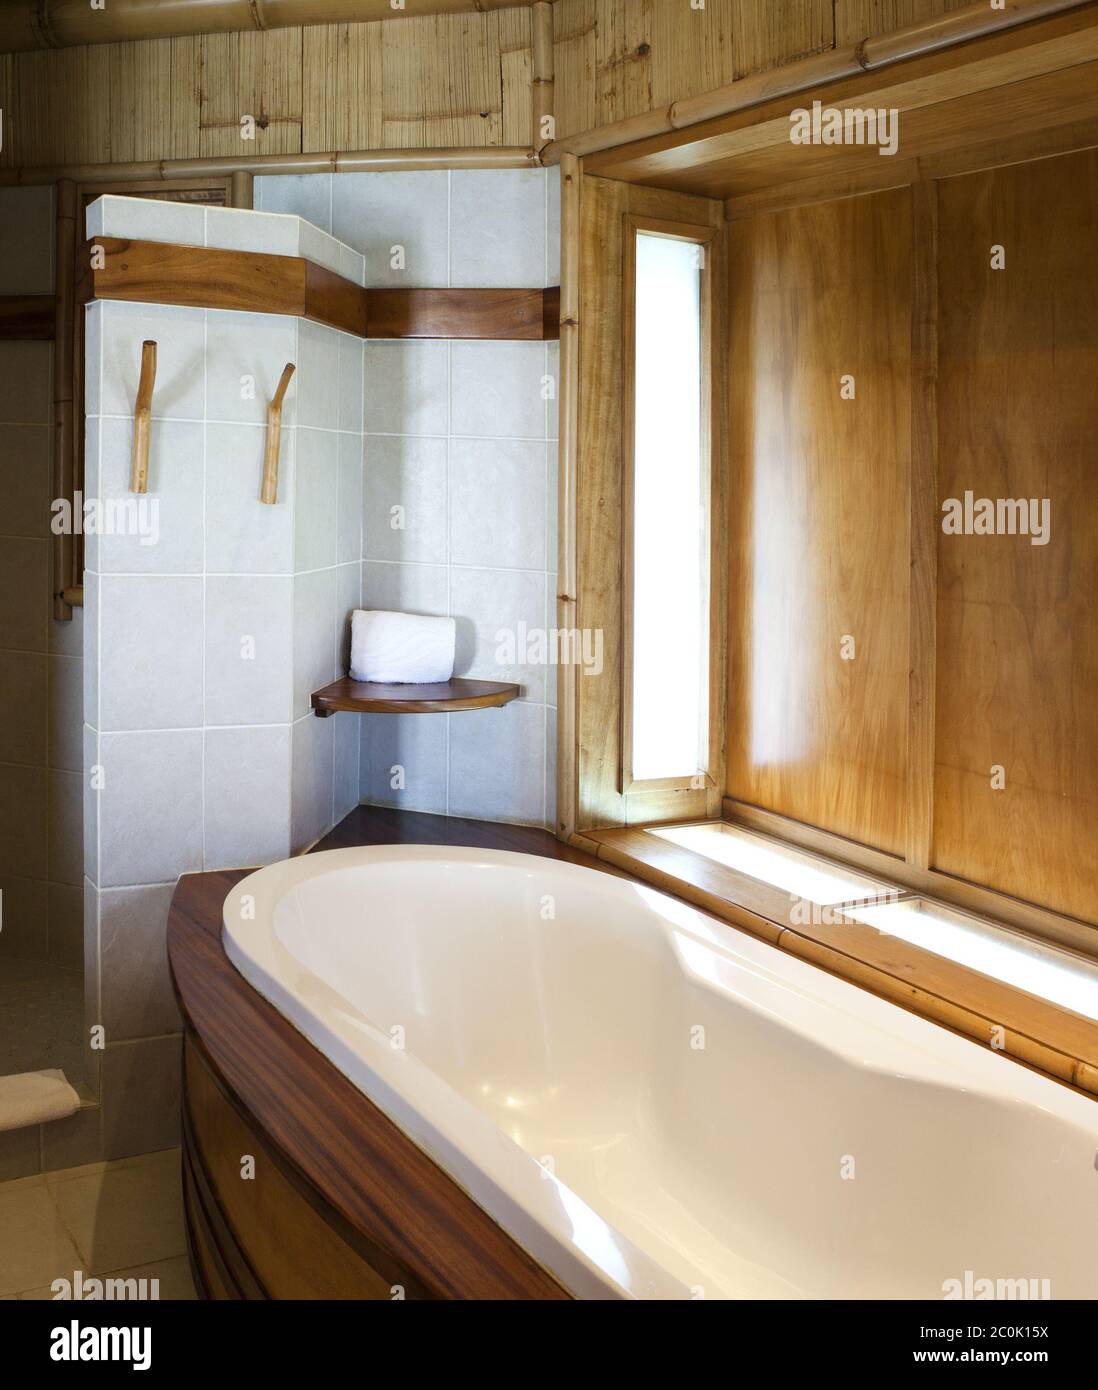 bathroom finished with natural materials Stock Photo